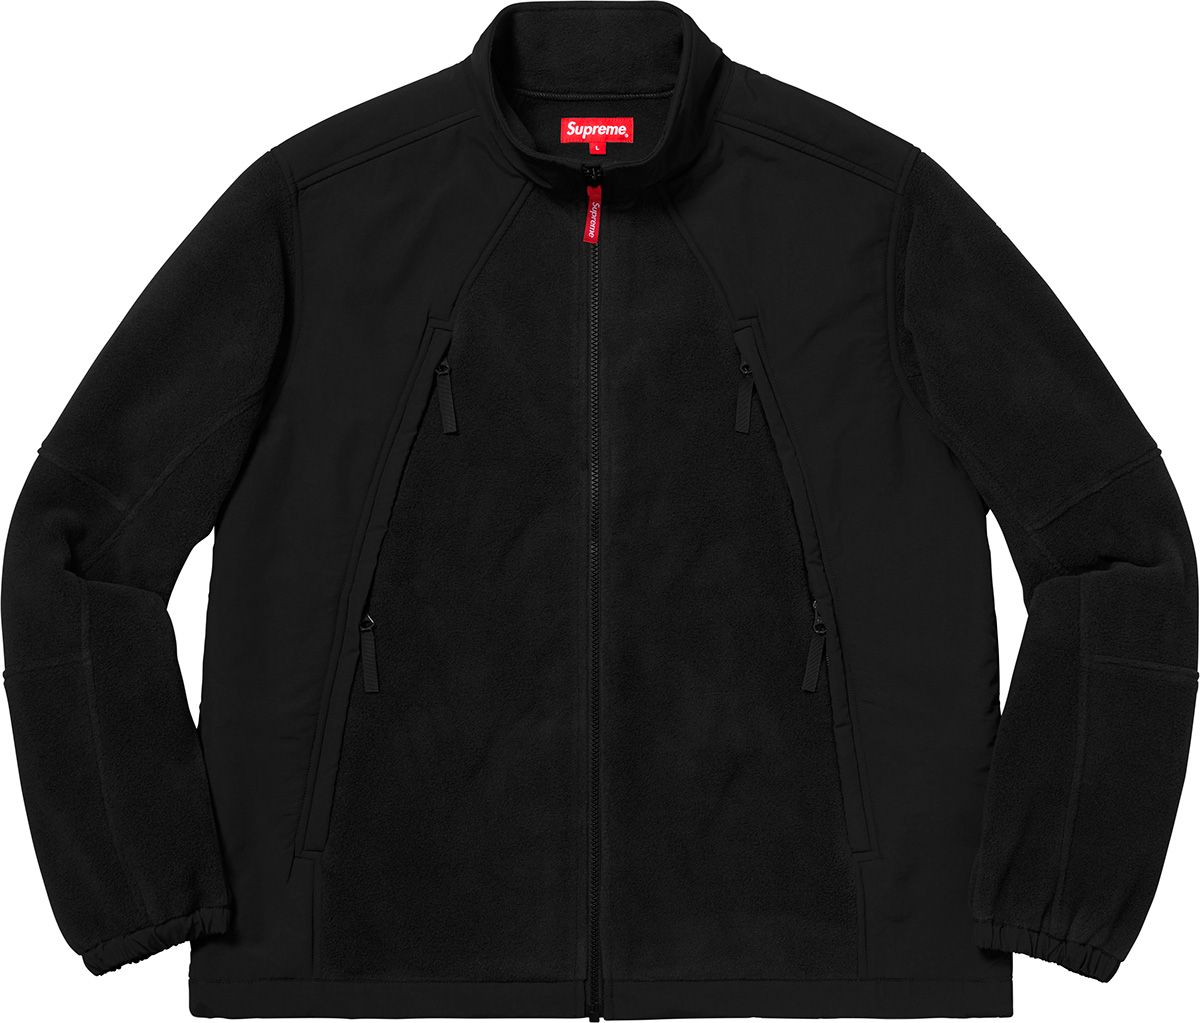 Polartec® Zip Up Jacket - Fall/Winter 2018 Preview – Supreme